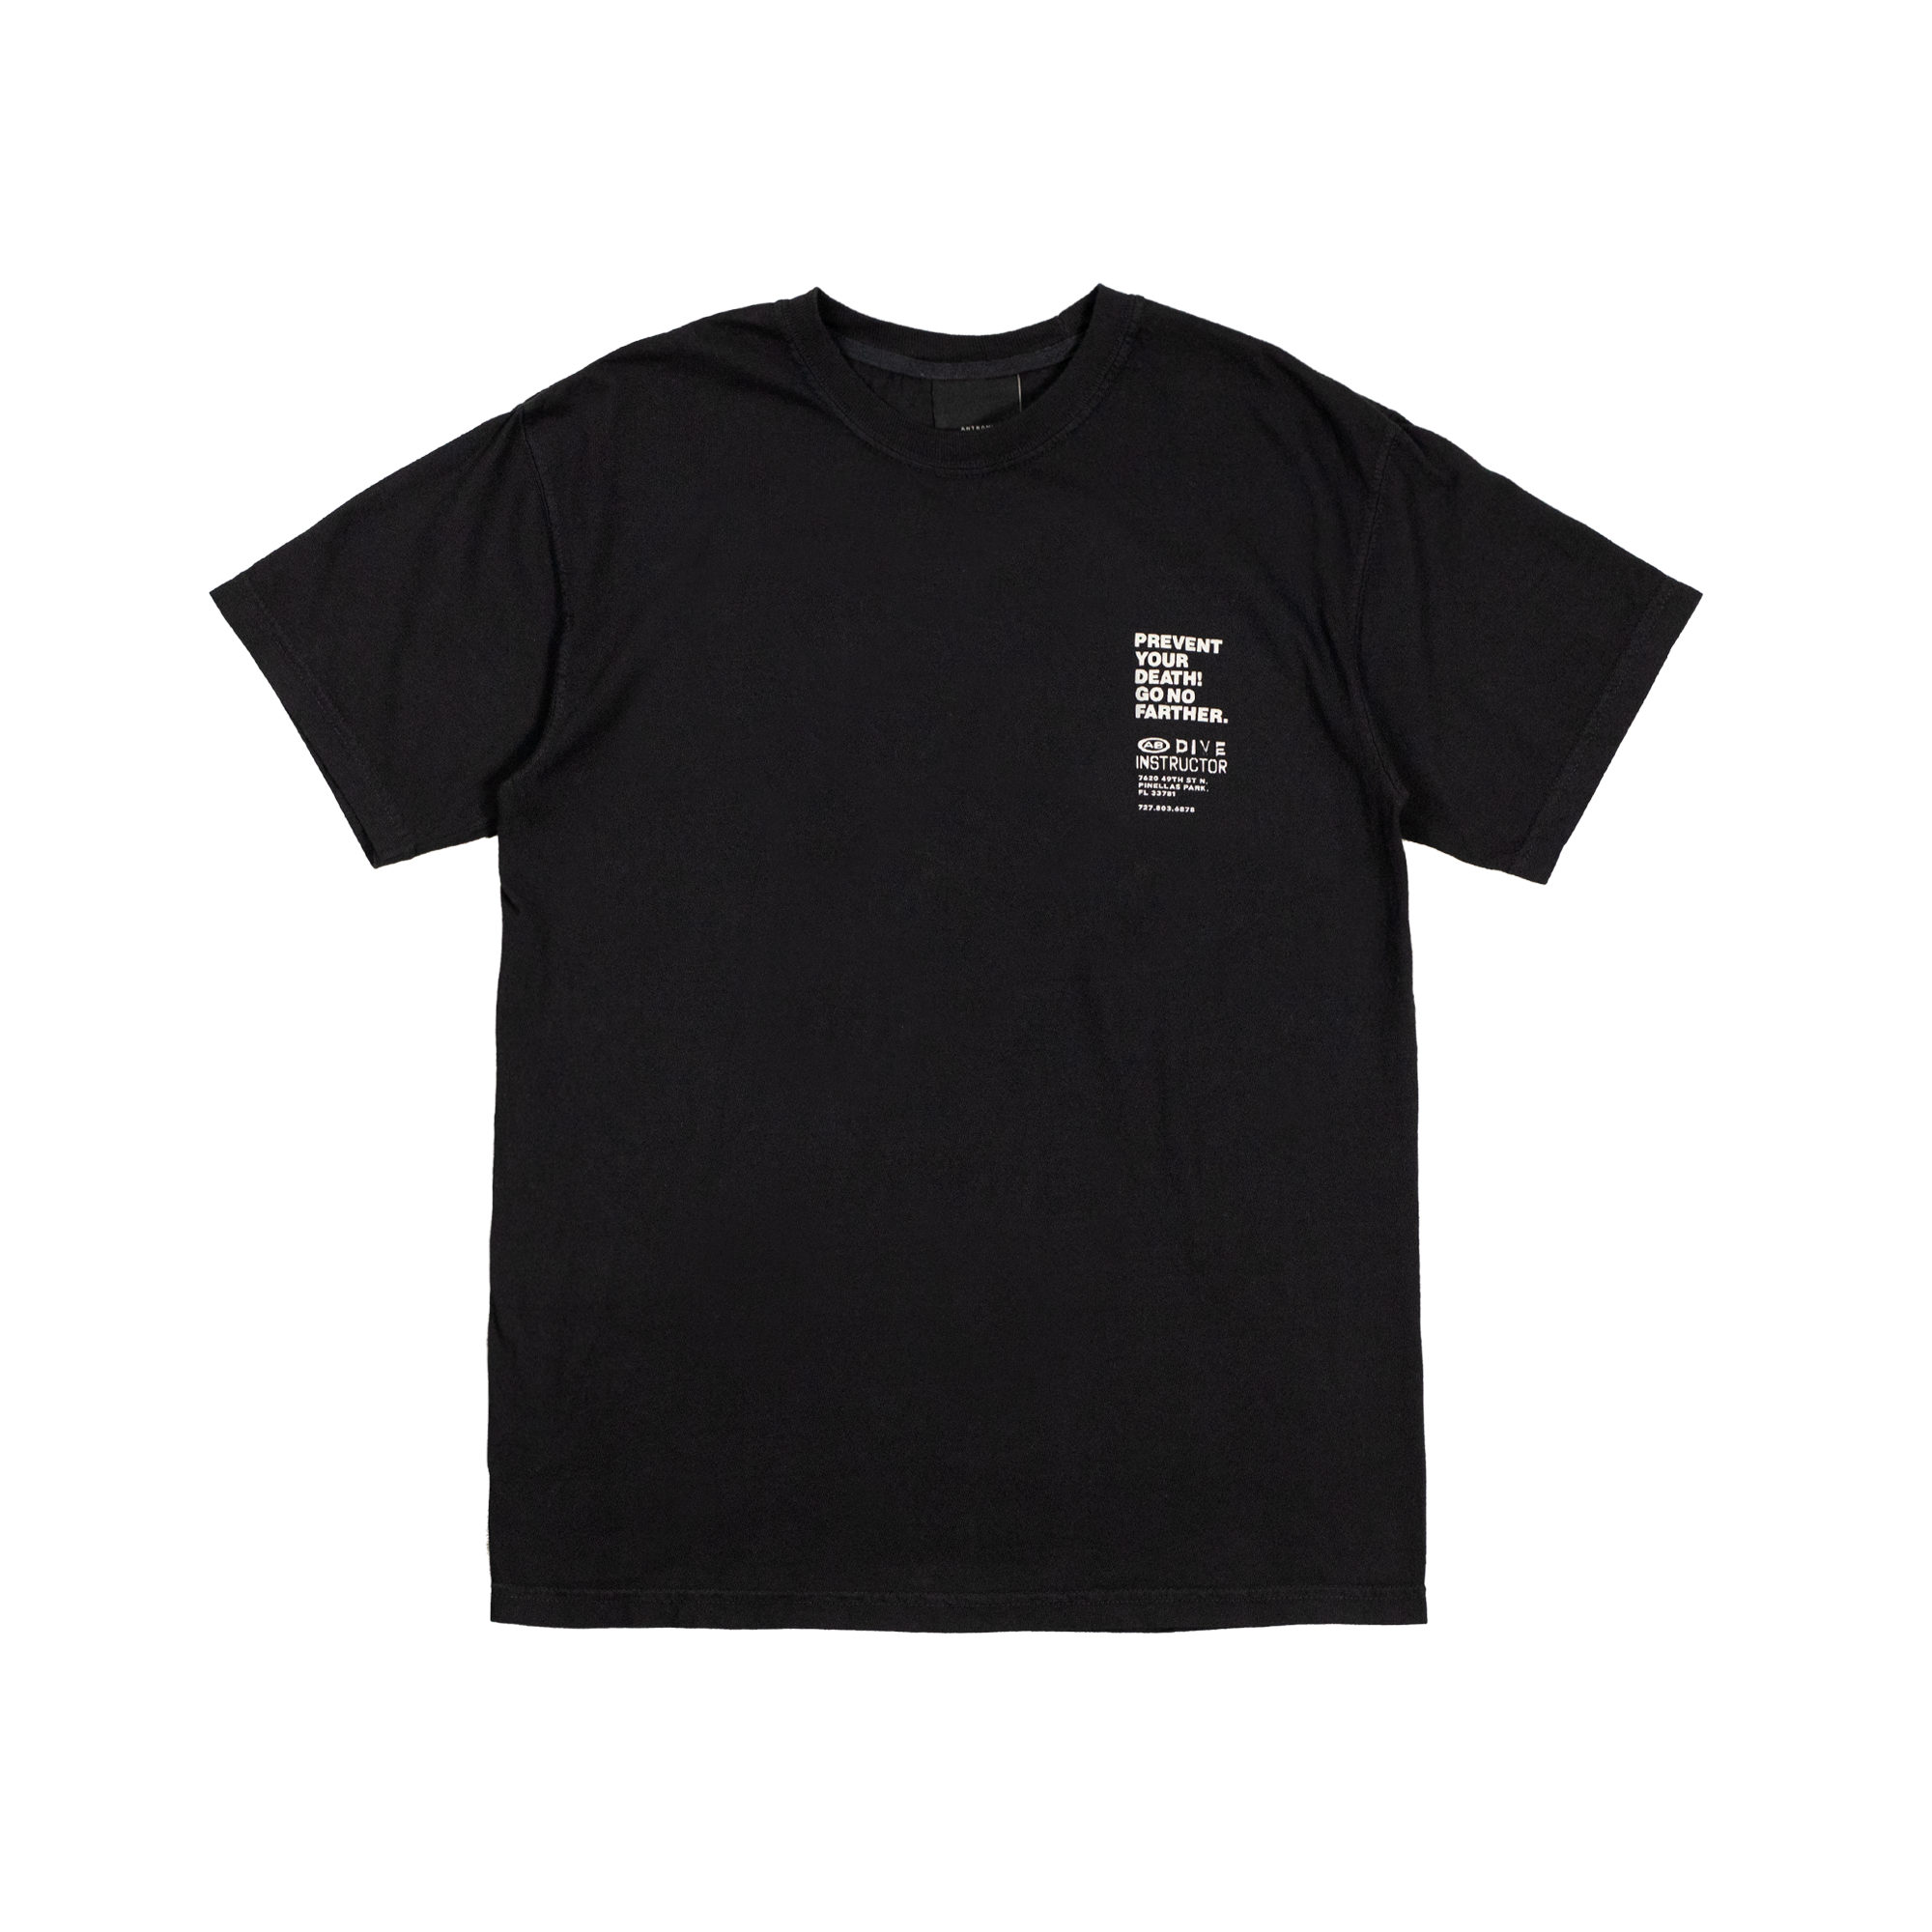 "Prevent Your Death" TEE - Black